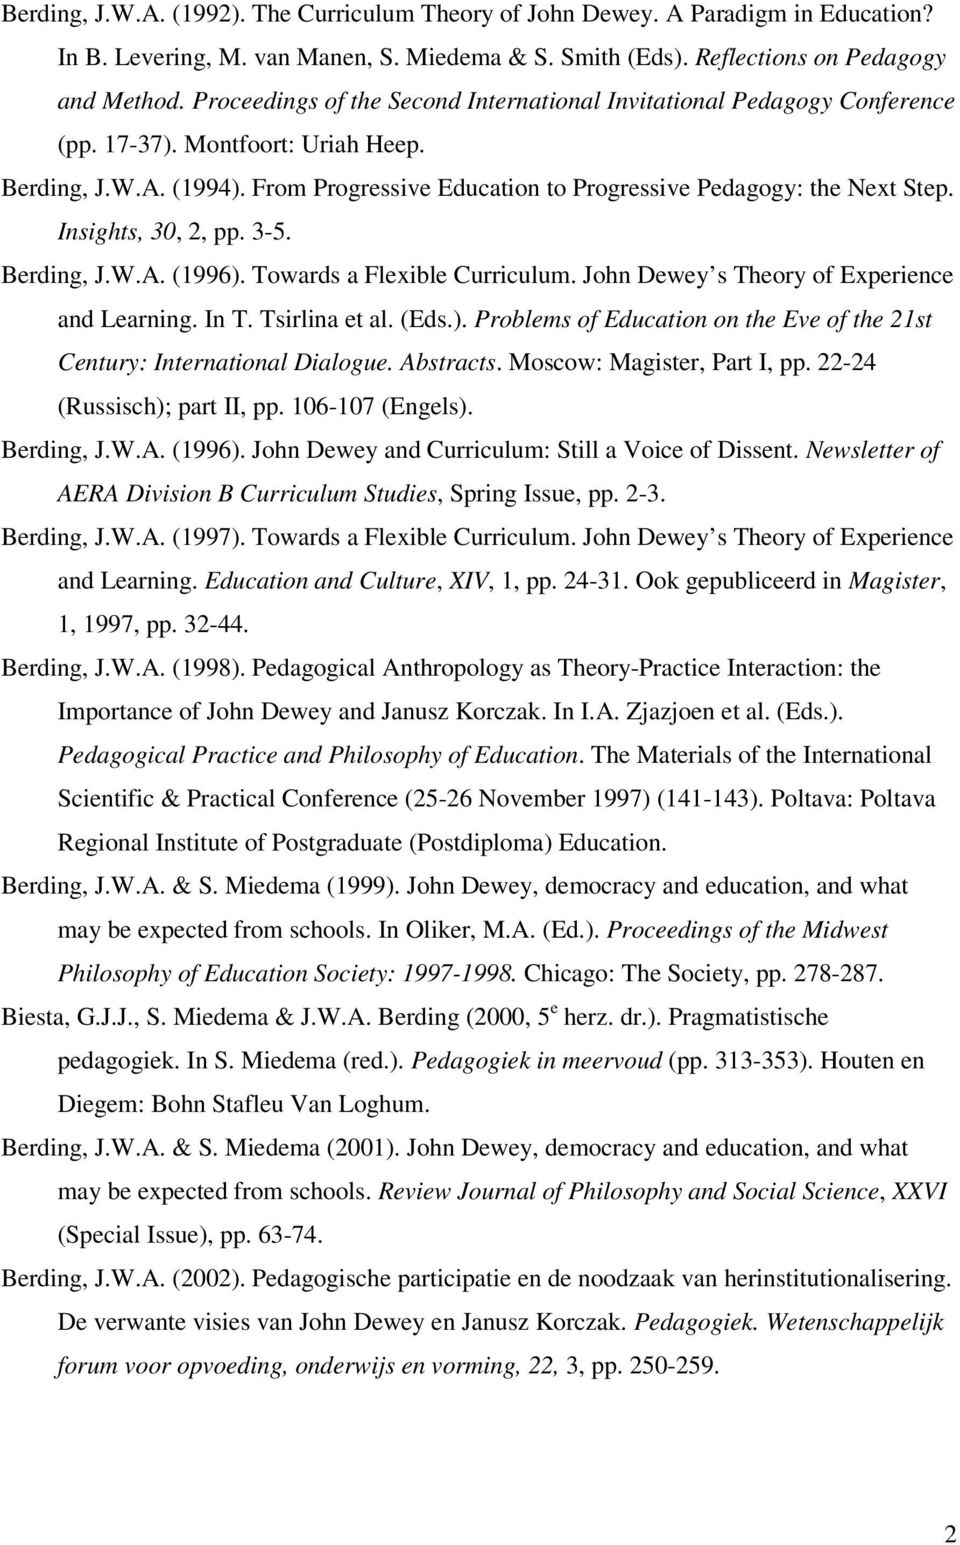 Insights, 30, 2, pp. 3-5. Berding, J.W.A. (1996). Towards a Flexible Curriculum. John Dewey s Theory of Experience and Learning. In T. Tsirlina et al. (Eds.). Problems of Education on the Eve of the 21st Century: International Dialogue.